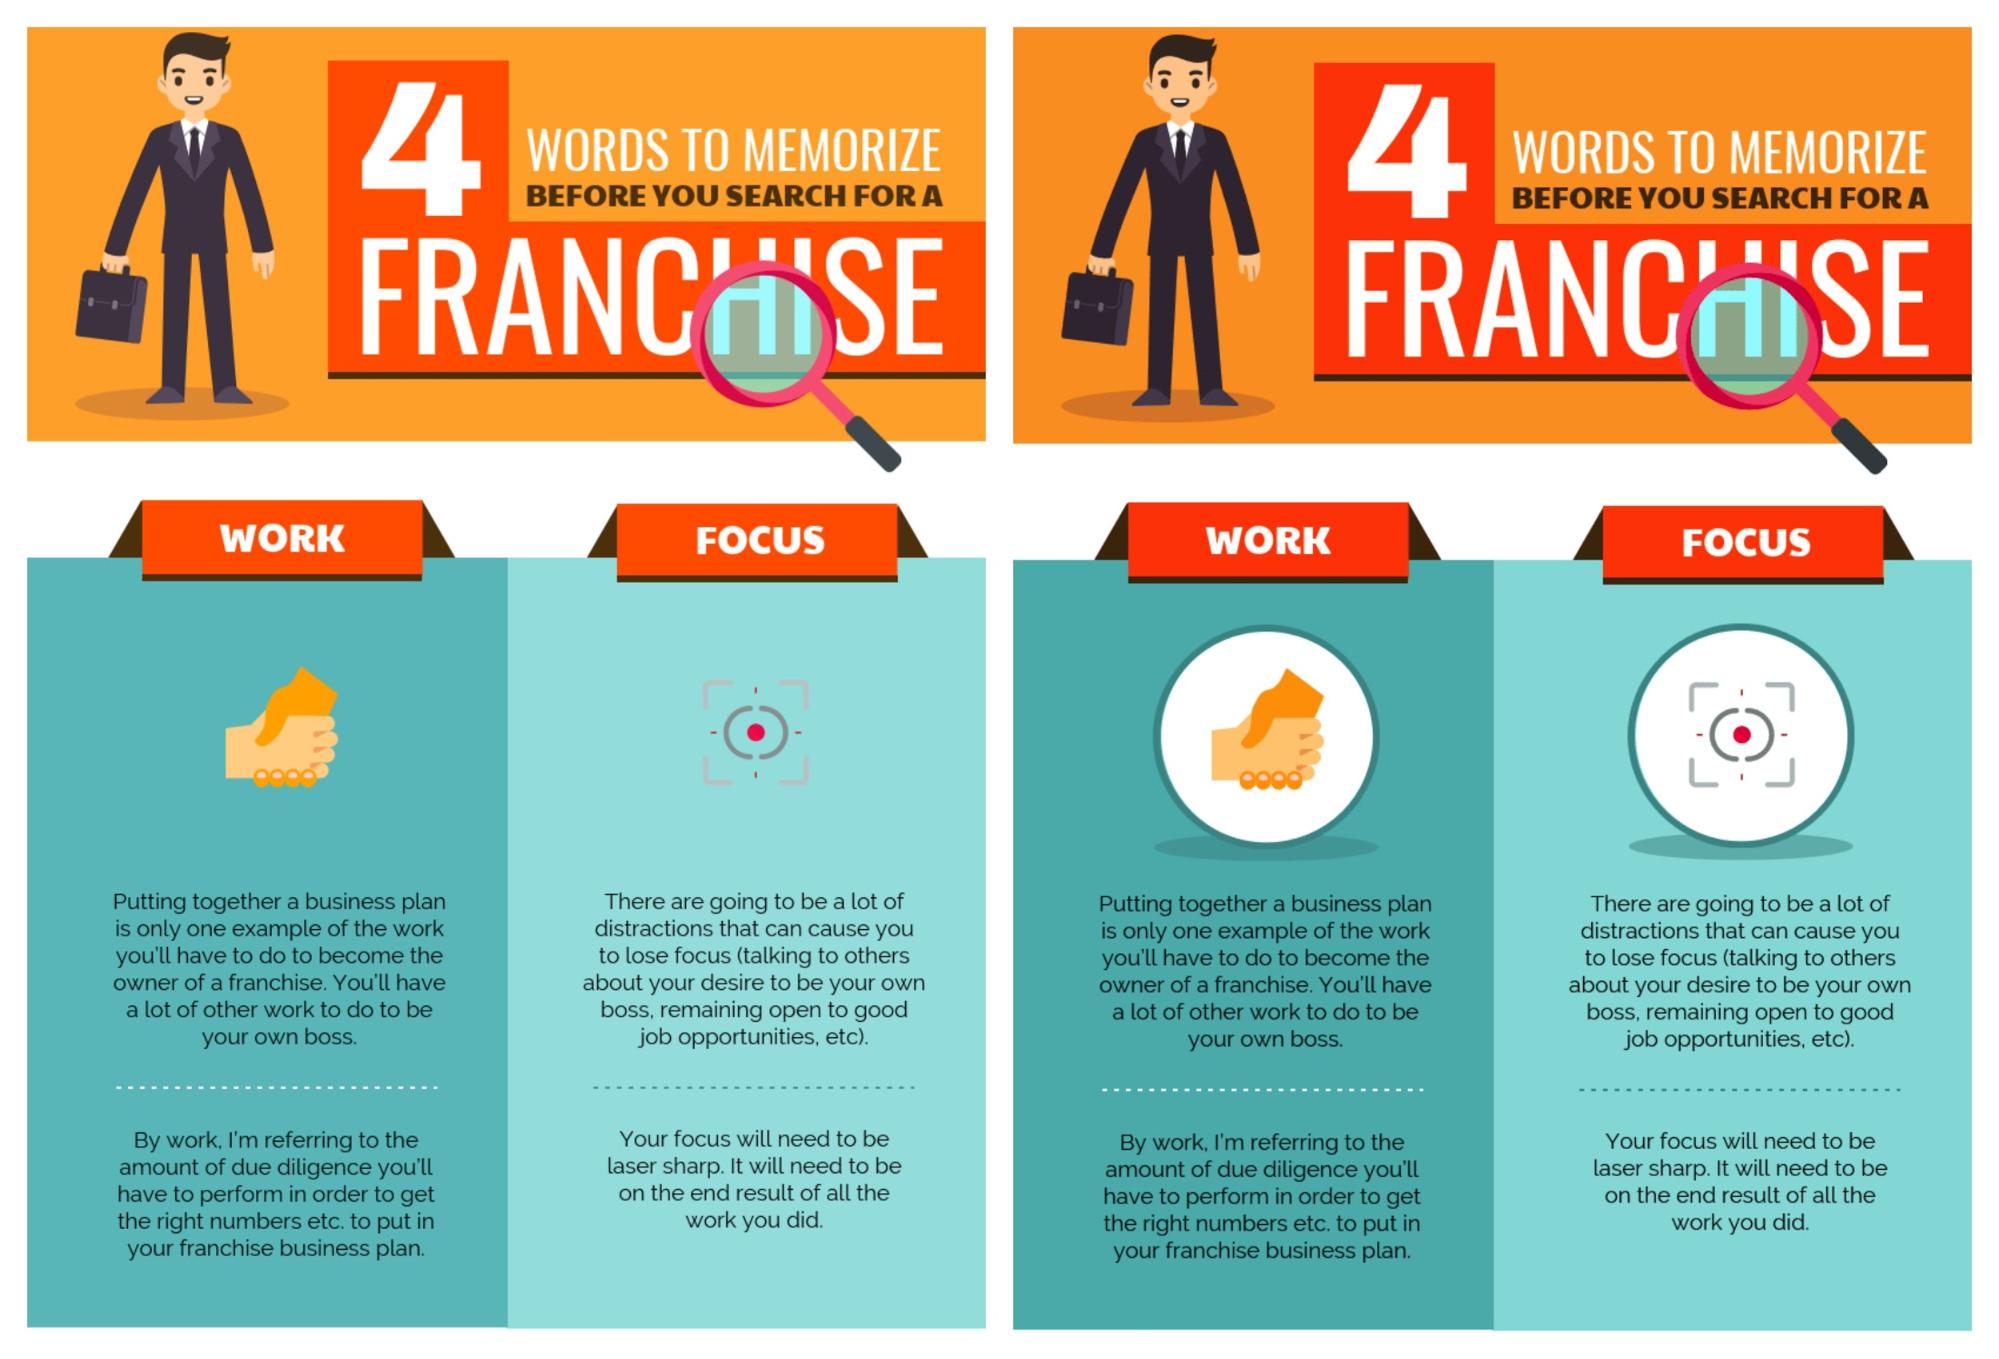 7 Quick Ways to Improve Your Company Culture TodayInfographic  YFS Magazine